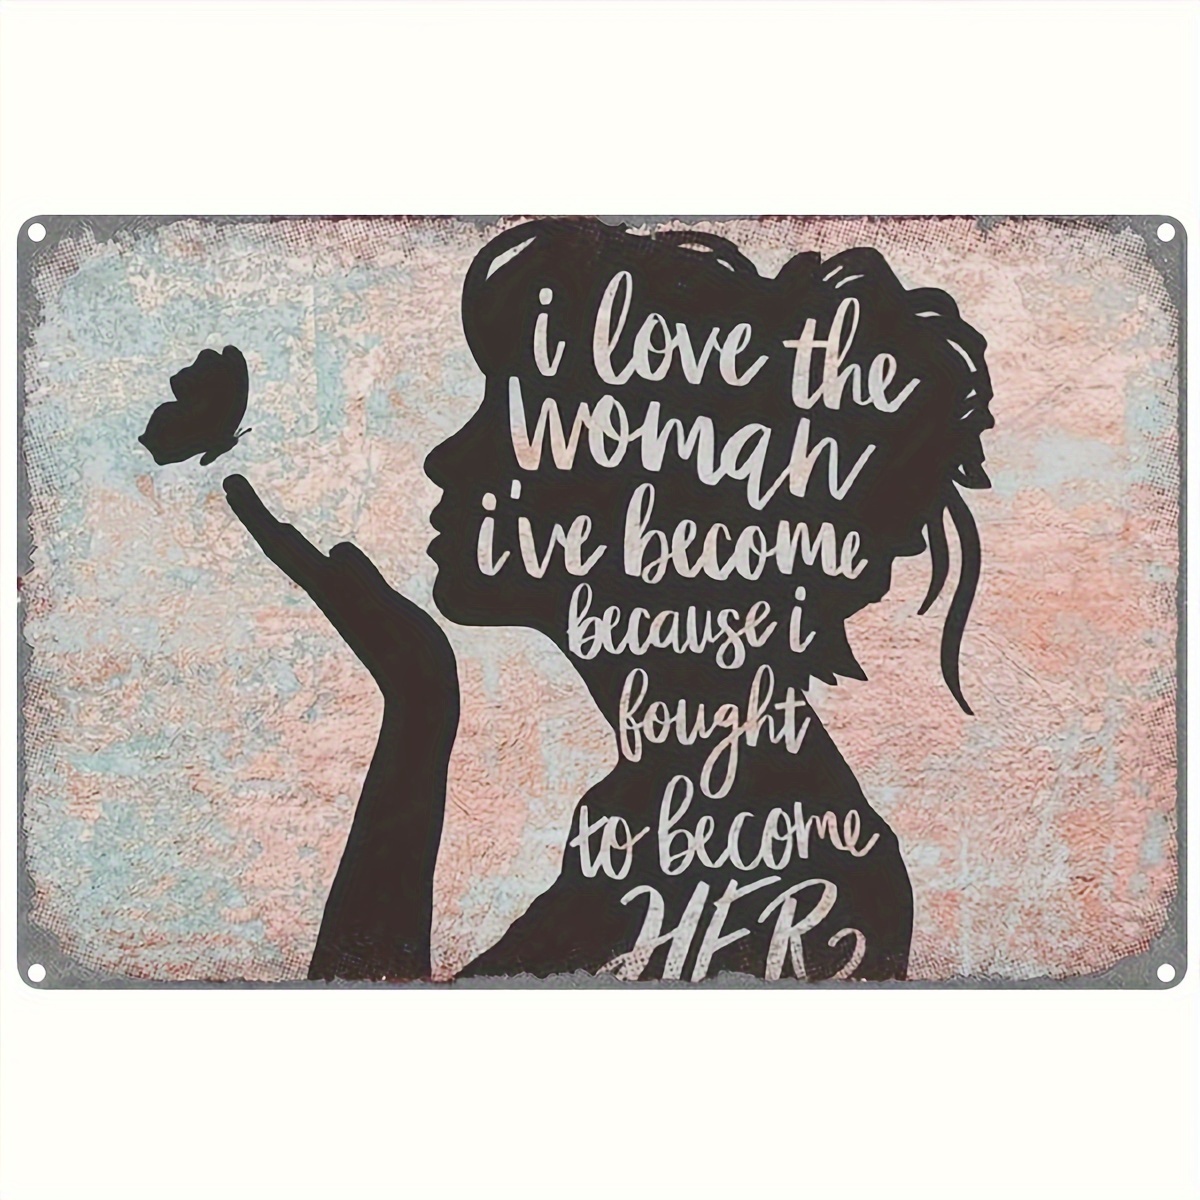 

1pc Vintage Metal Tin Sign, Love The Woman I've Become Because I Fought To Become Her Sign Novelty Posters, Funny Signs For Home Kitchen Garage Man Cave, Home Decor Wall Art 8x12 Inches Tinplate